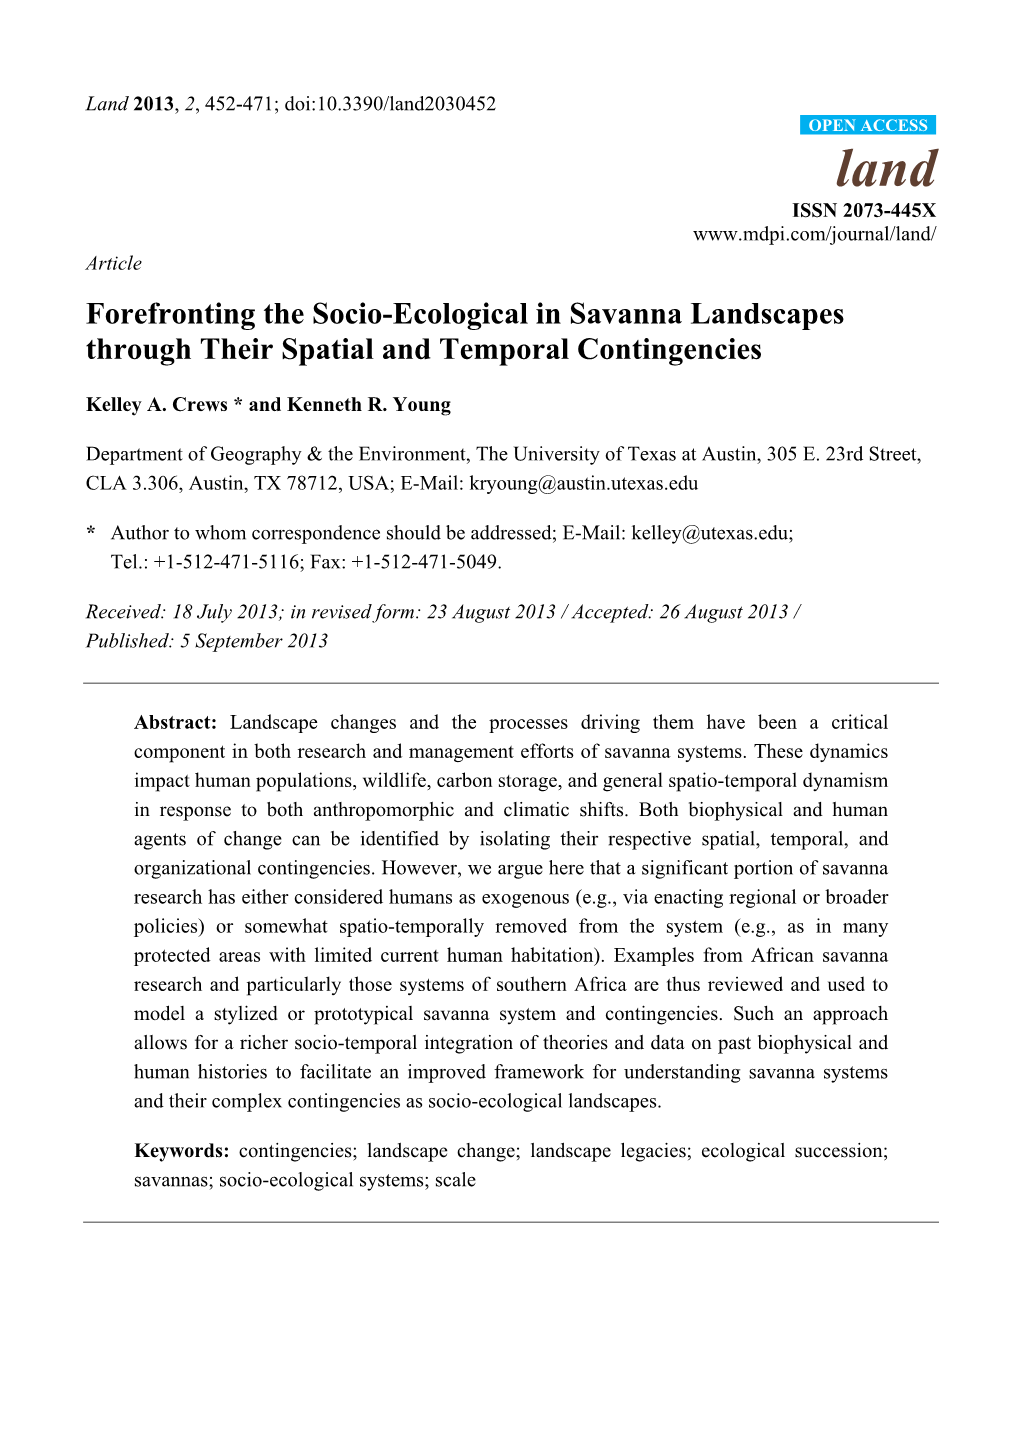 Forefronting the Socio-Ecological in Savanna Landscapes Through Their Spatial and Temporal Contingencies